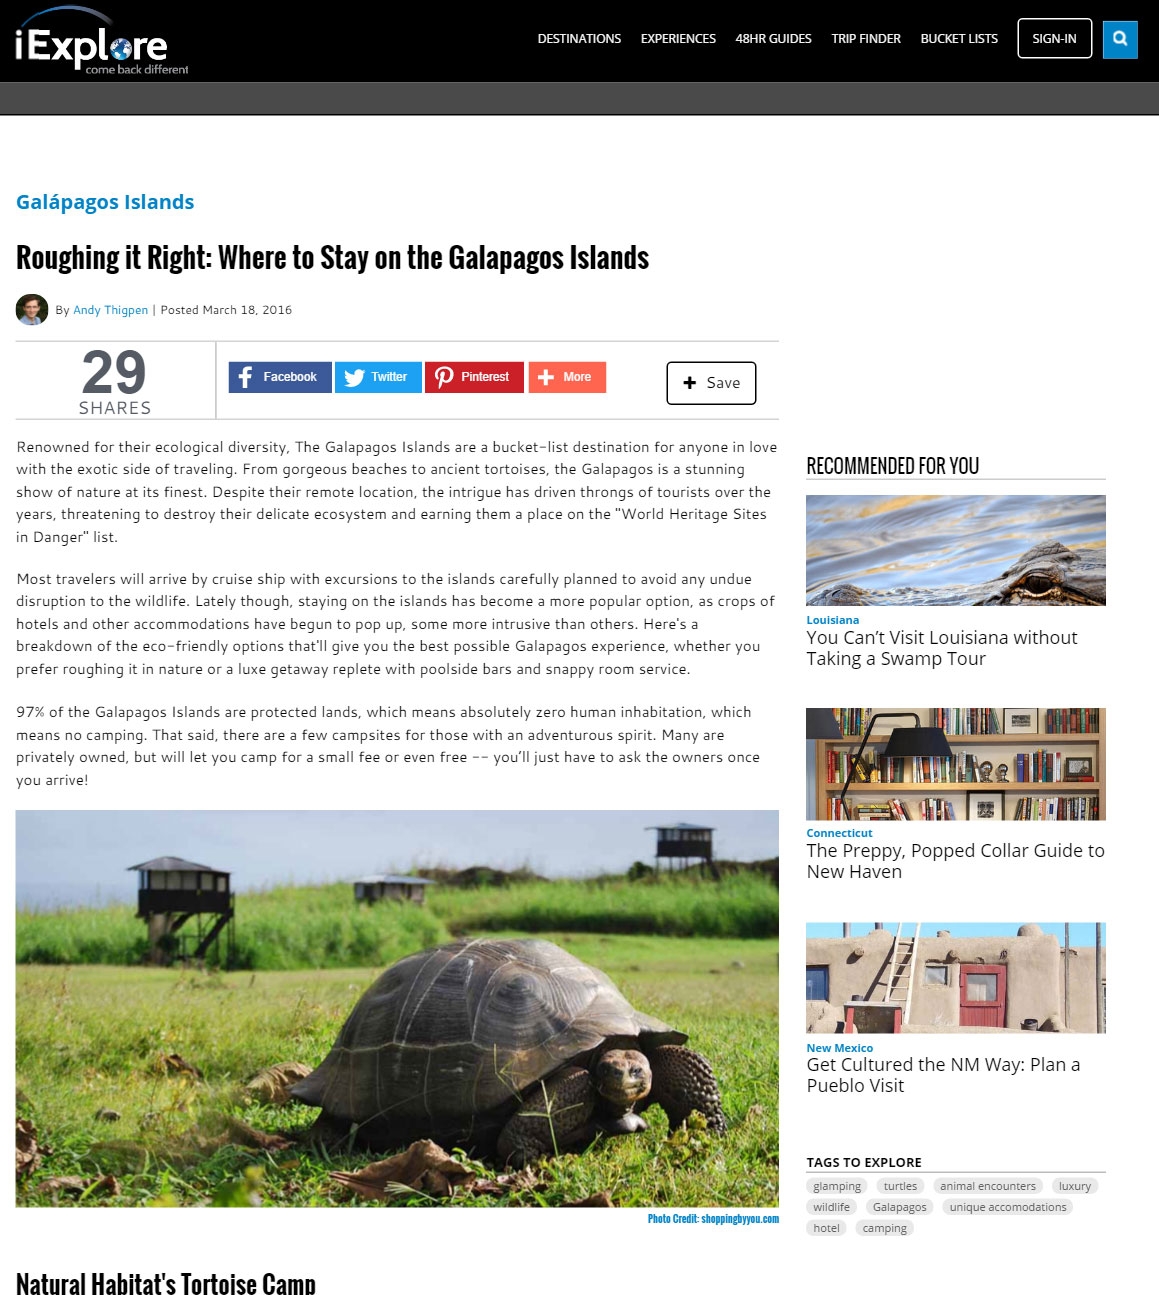 Roughing it Right: Where to Stay on the Galapagos Islands